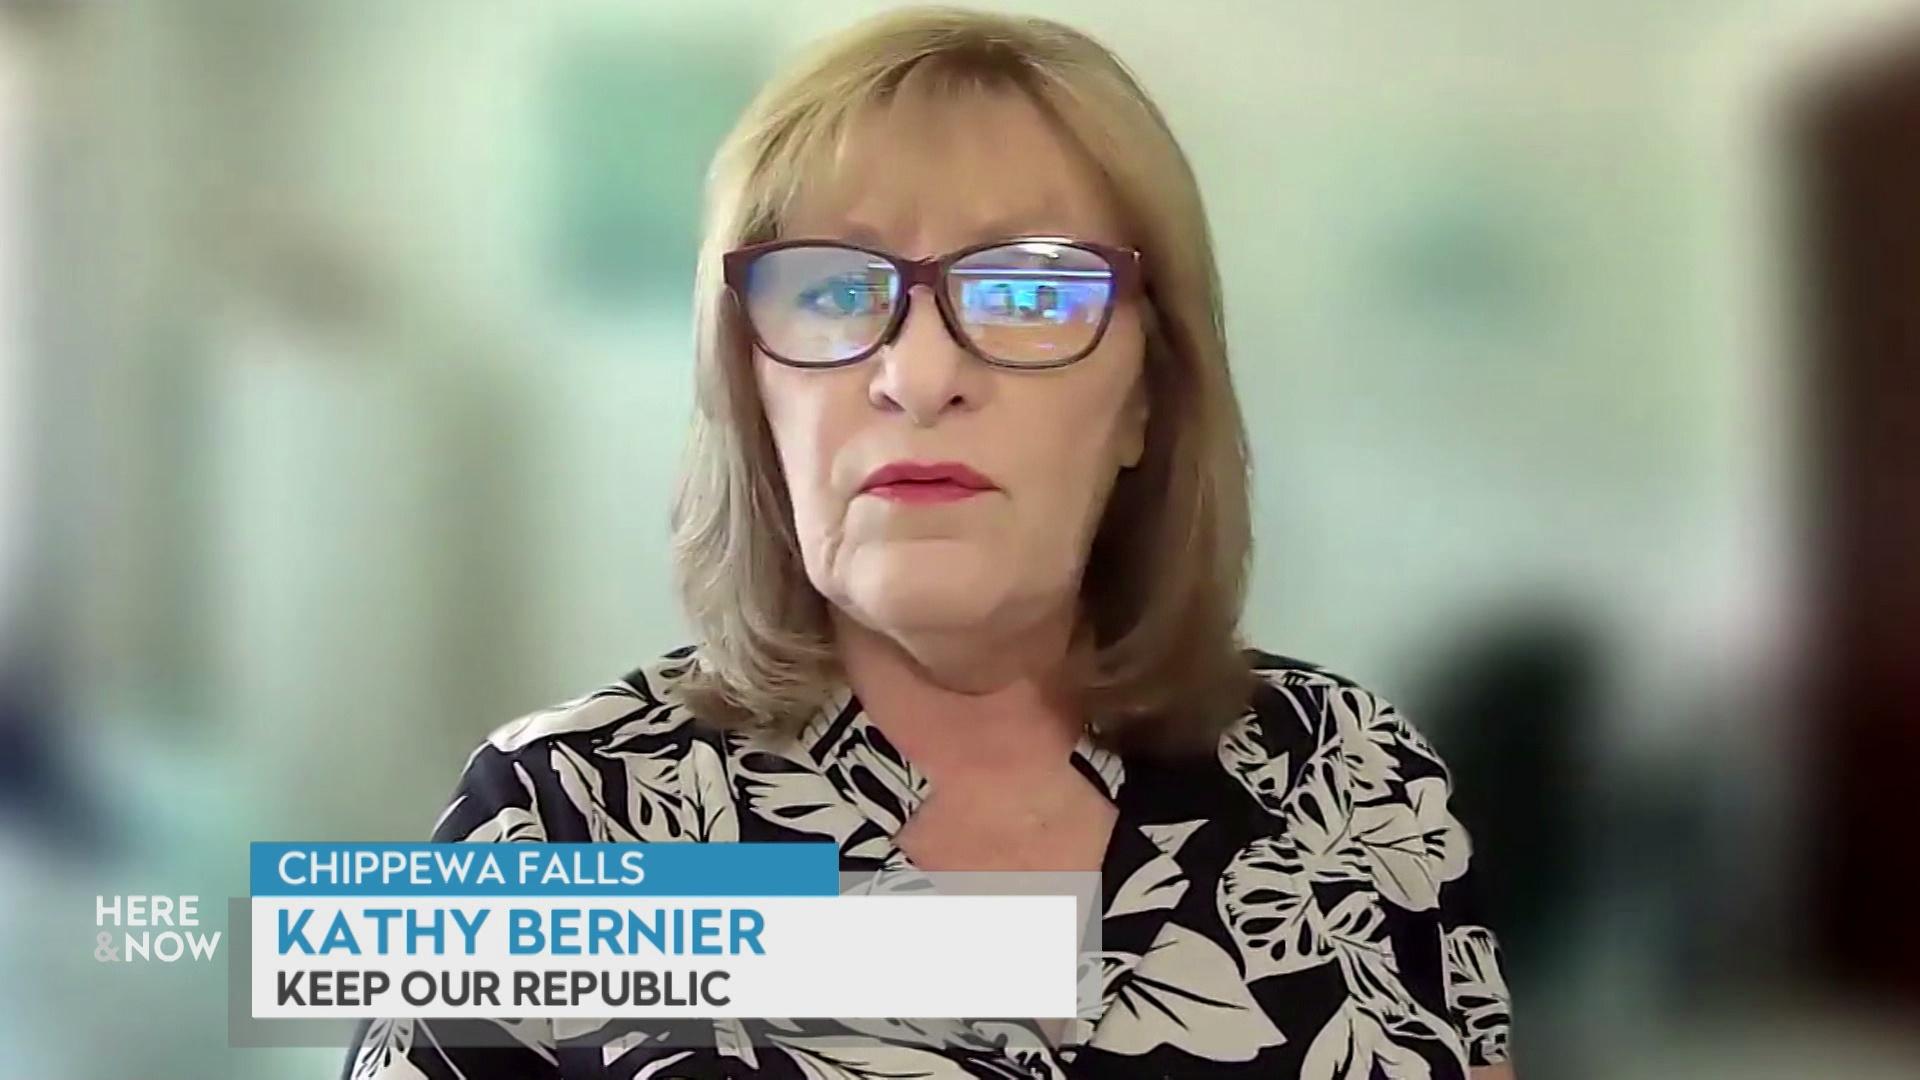 A still image from a video shows Kathy Bernier seated with a blurred out screen behind her with a graphic at bottom reading 'Chippewa Falls,' 'Kathy Bernier' and 'Keep Our Republic.'